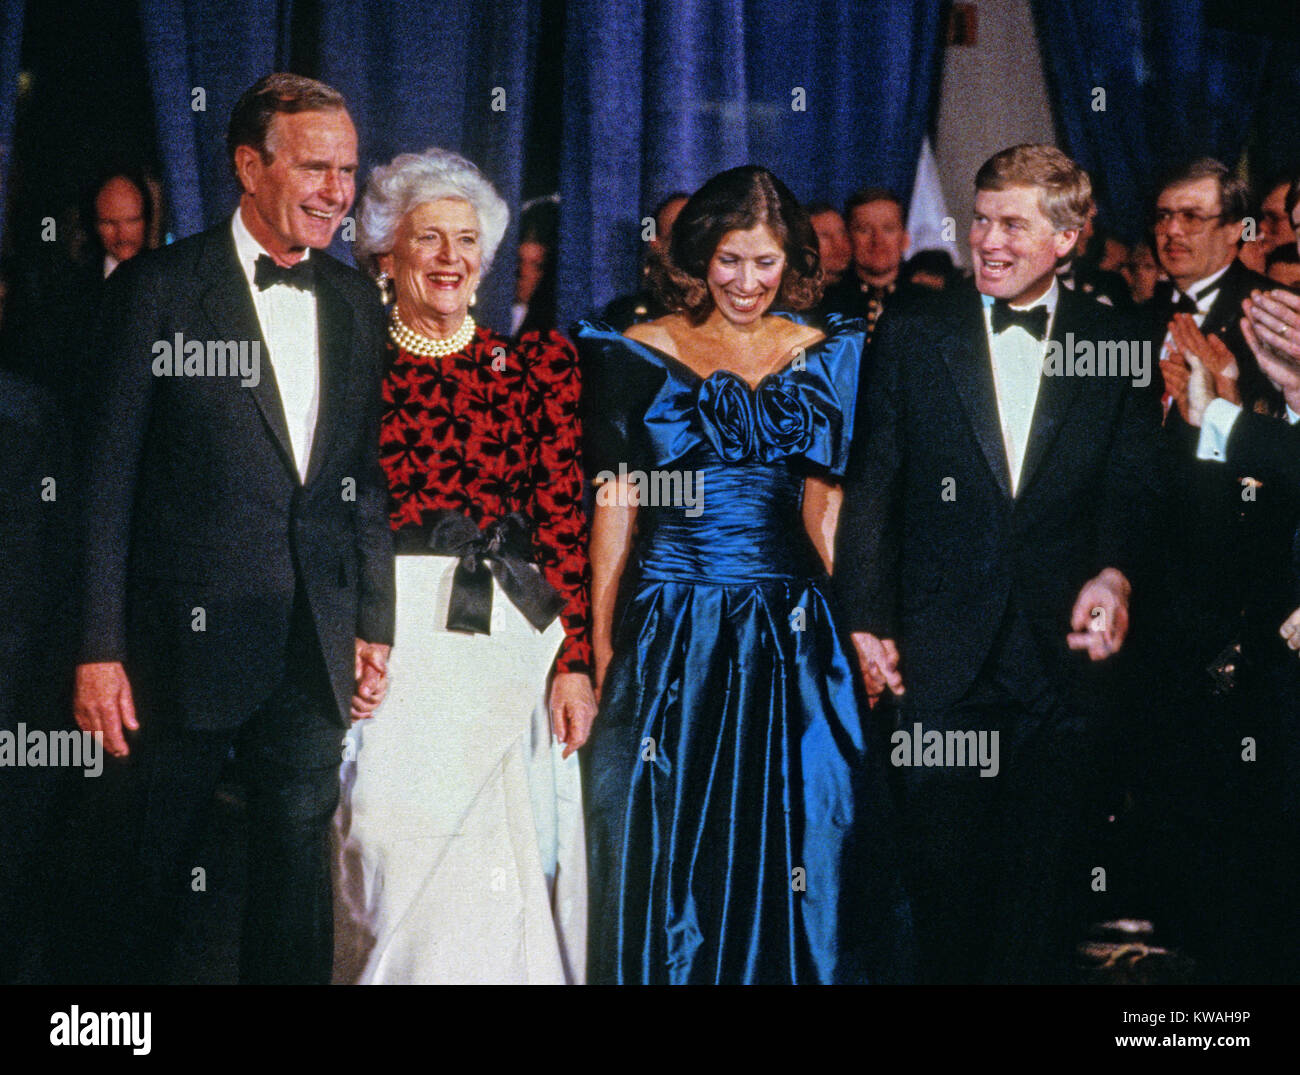 Washington, District of Columbia, USA. 18th Jan, 1989. From left to right: United States President-elect George H.W. Bush, Barbara Bush, Marilyn Quayle, and US Vice President-elect Dan Quayle, attends the Inaugural Gala at the Washington DC Convention Center in Washington, DC on January 18 1989. Credit: David Burnett/Pool via CNP Credit: David Burnett/CNP/ZUMA Wire/Alamy Live News Stock Photo